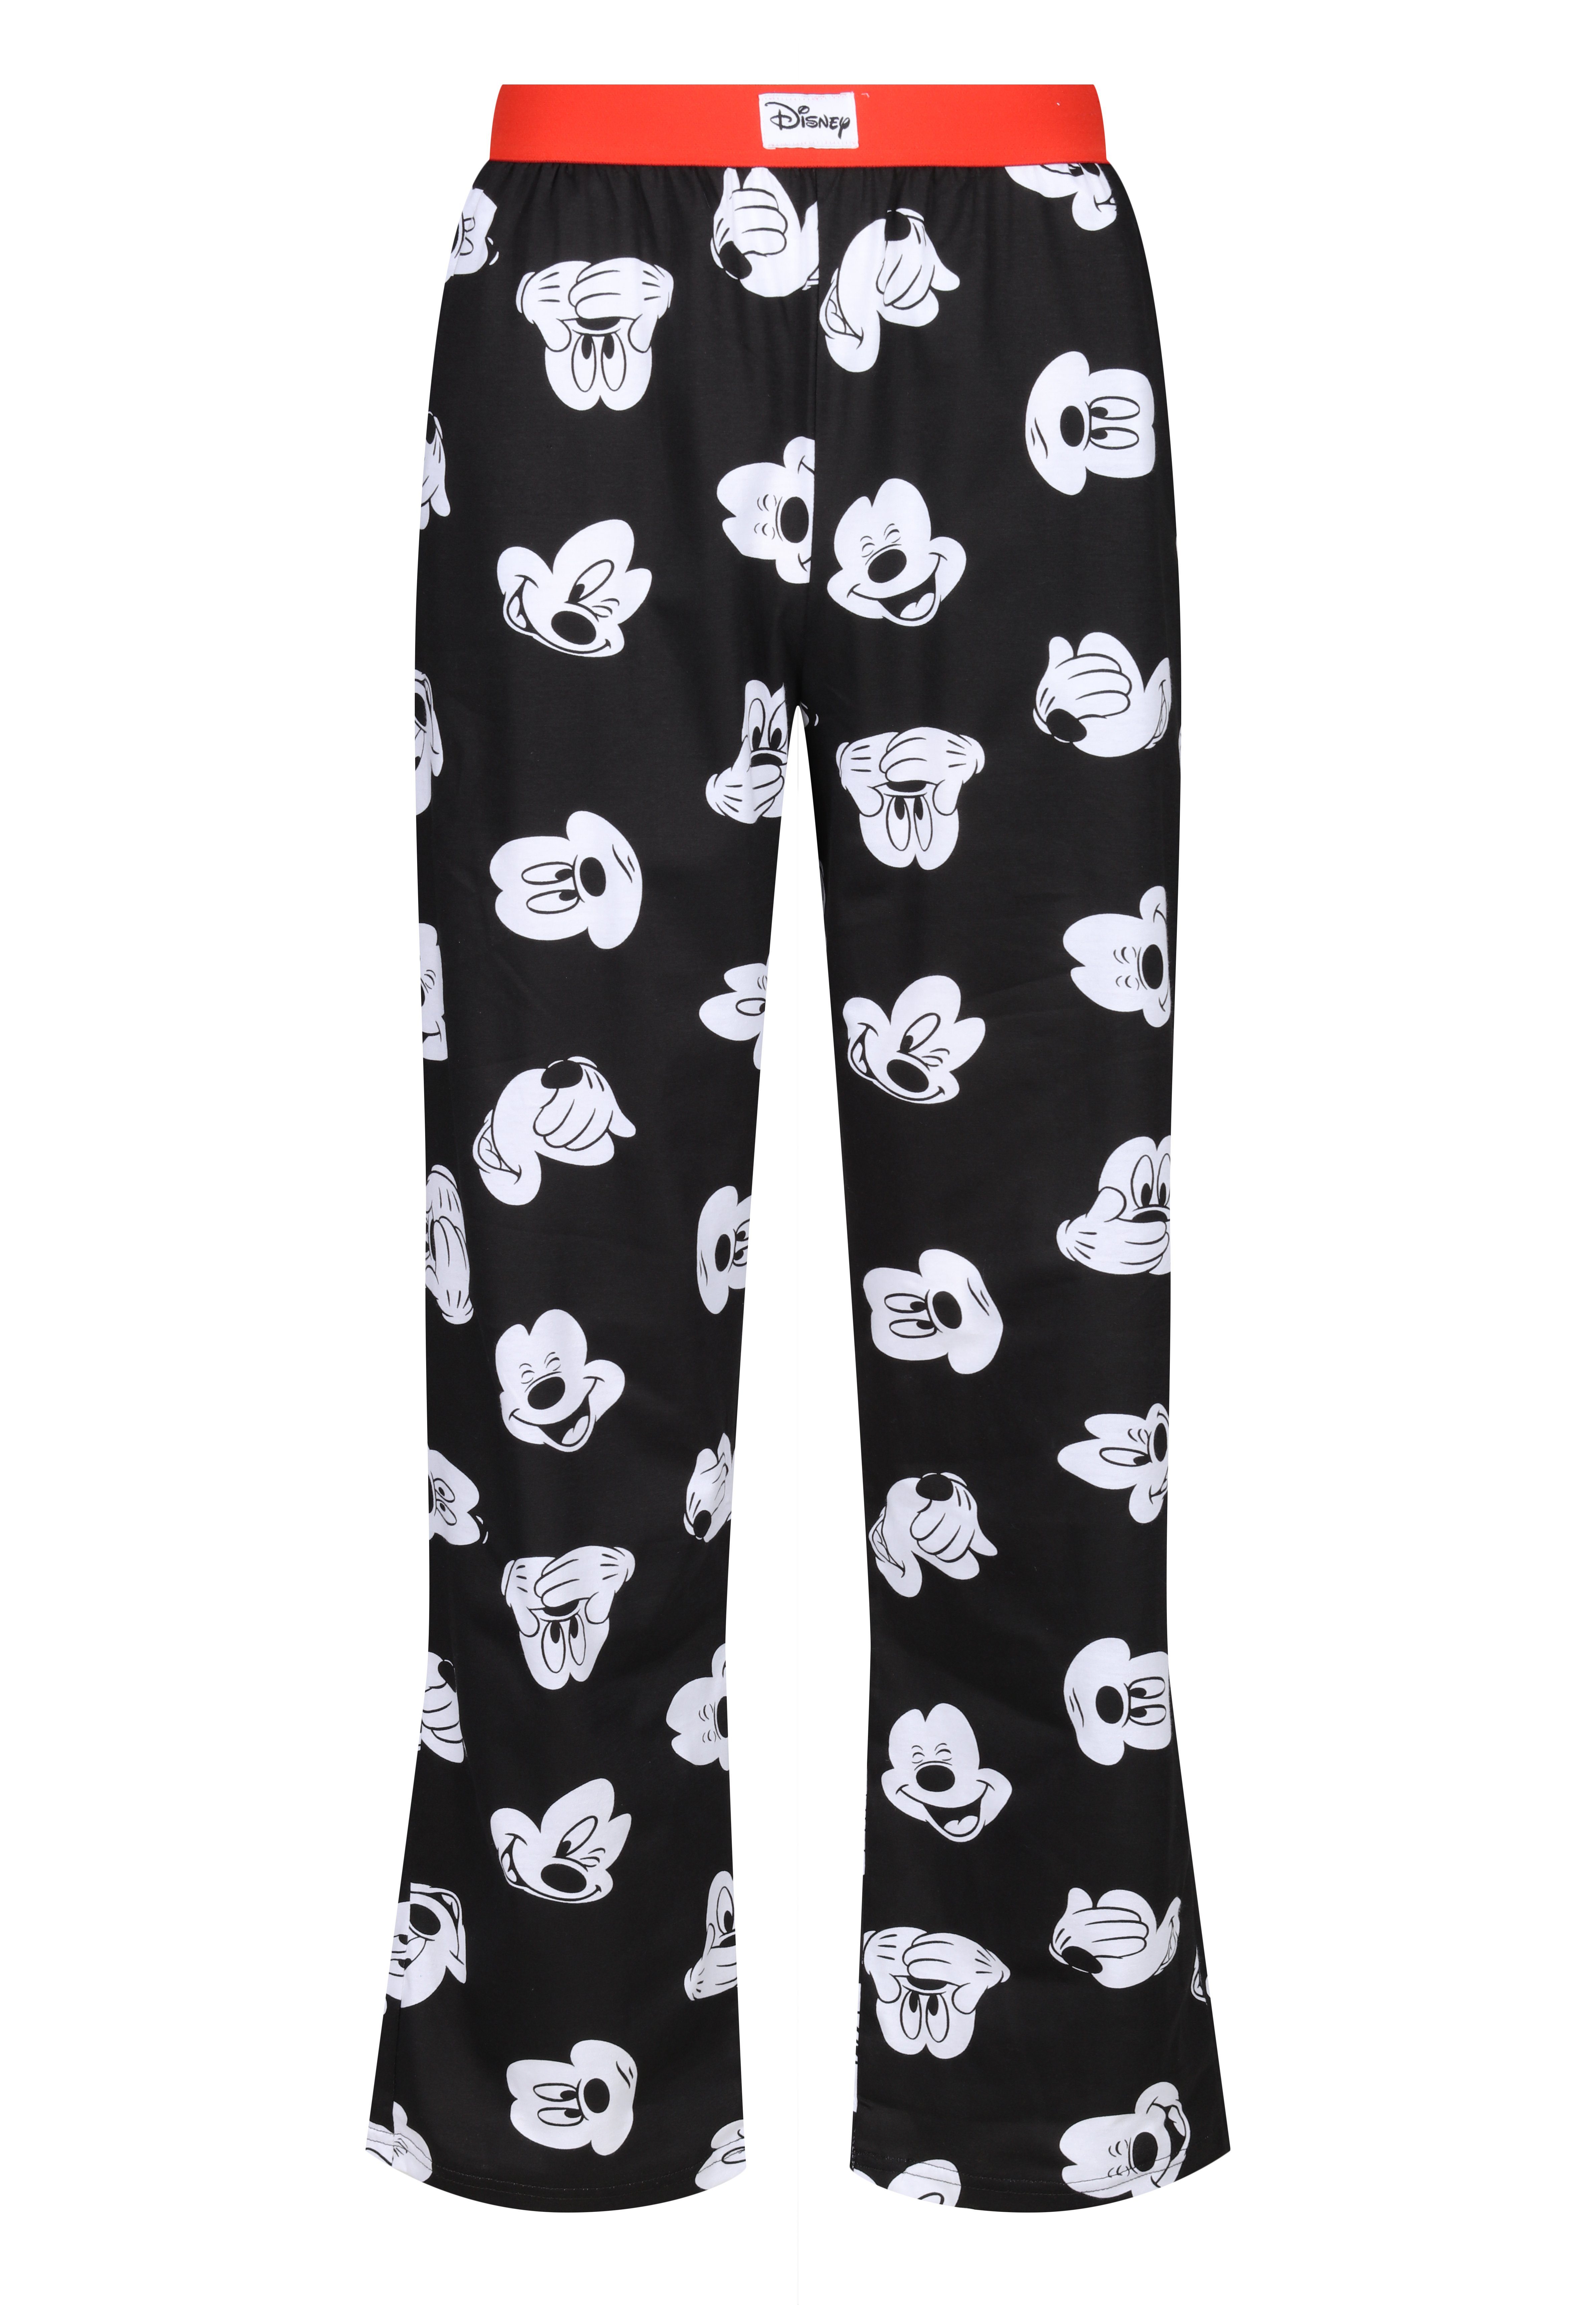 Expressions Loungepants Black Loungepant Mickey Recovered - Disney